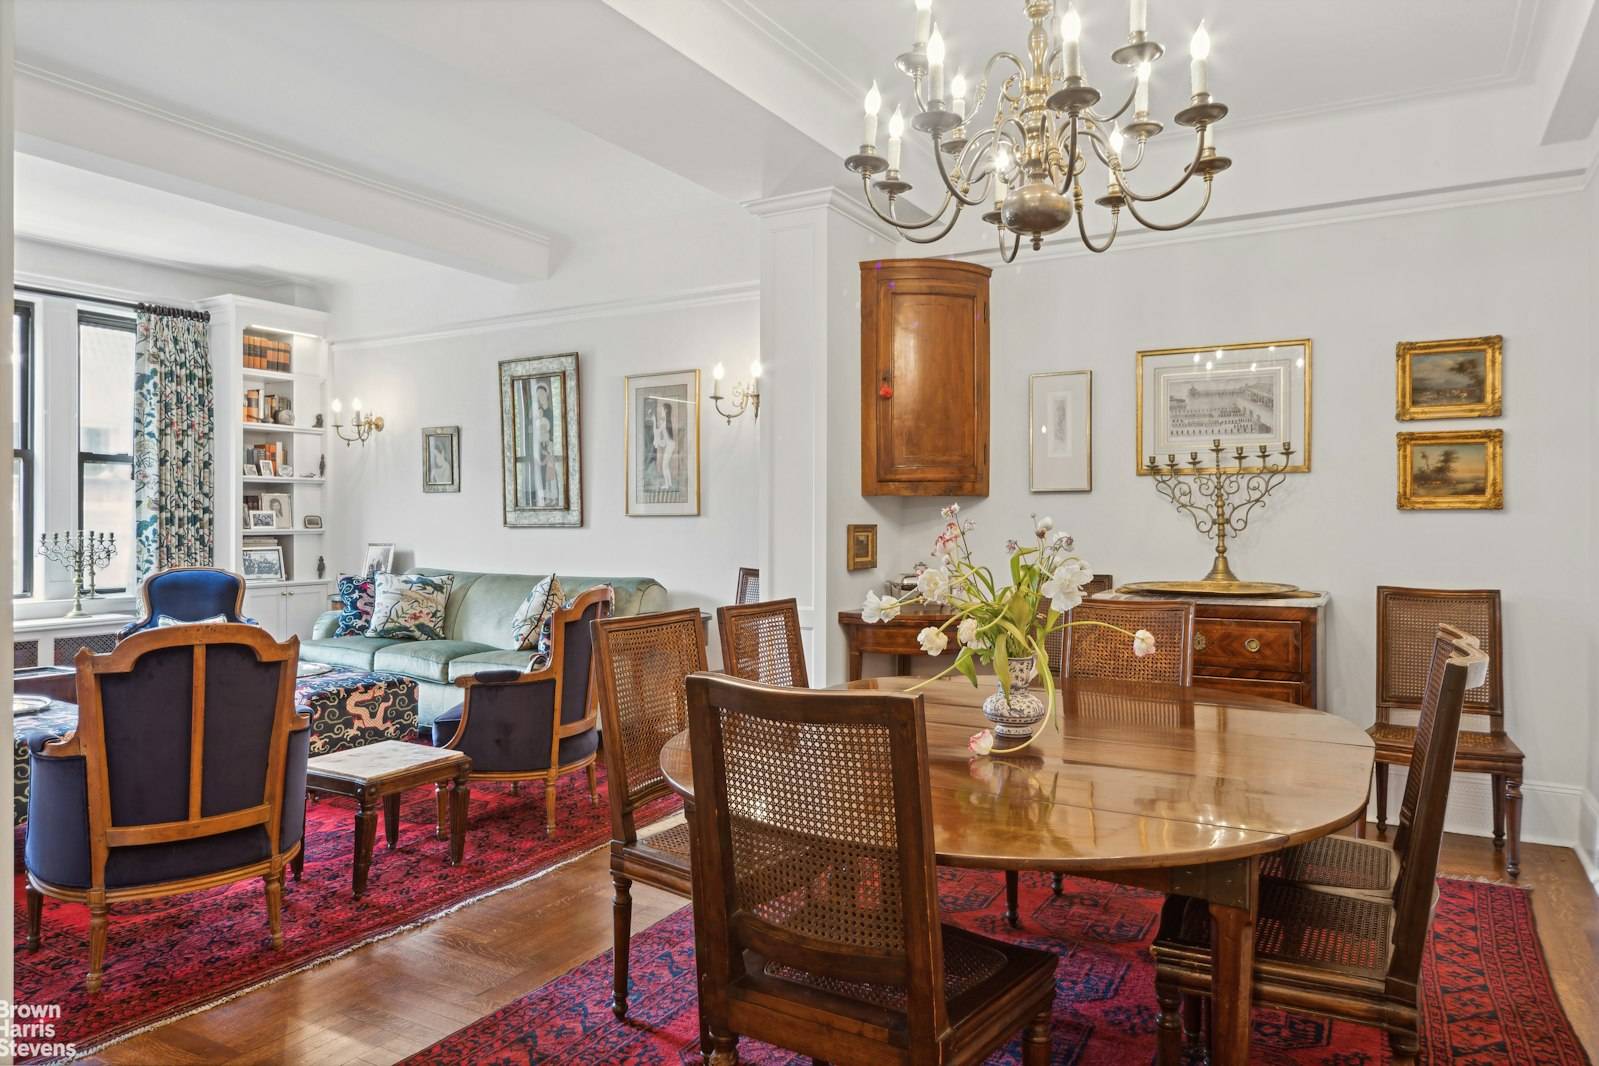 Welcome to this rarely available exquisite classic 6 apartment in one of the most sought after prewar buildings on the upper west side.